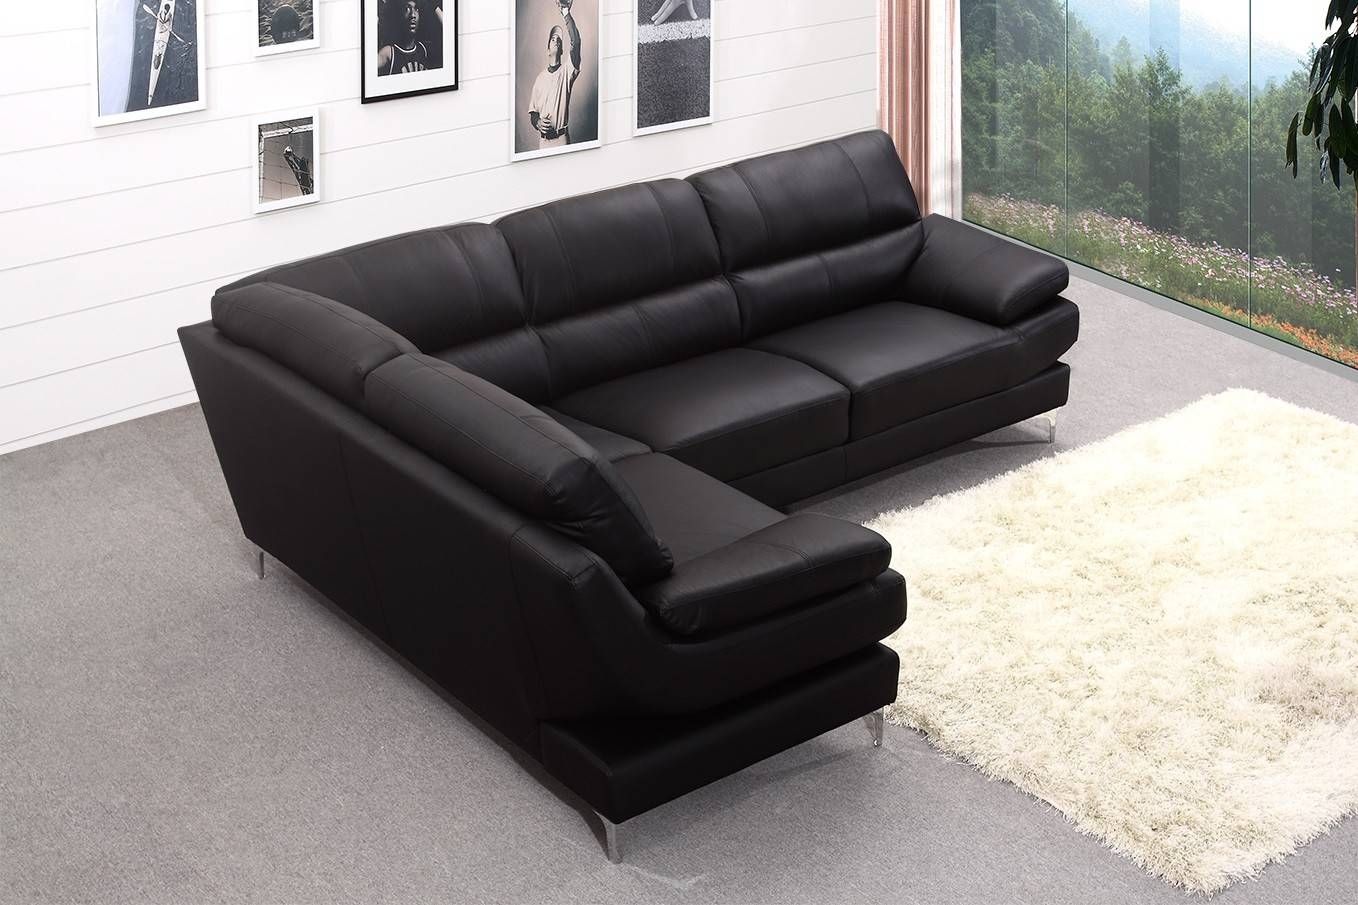 Deep Leather Corner Sofa | Tehranmix Decoration Intended For Large Black Leather Corner Sofas (View 27 of 30)